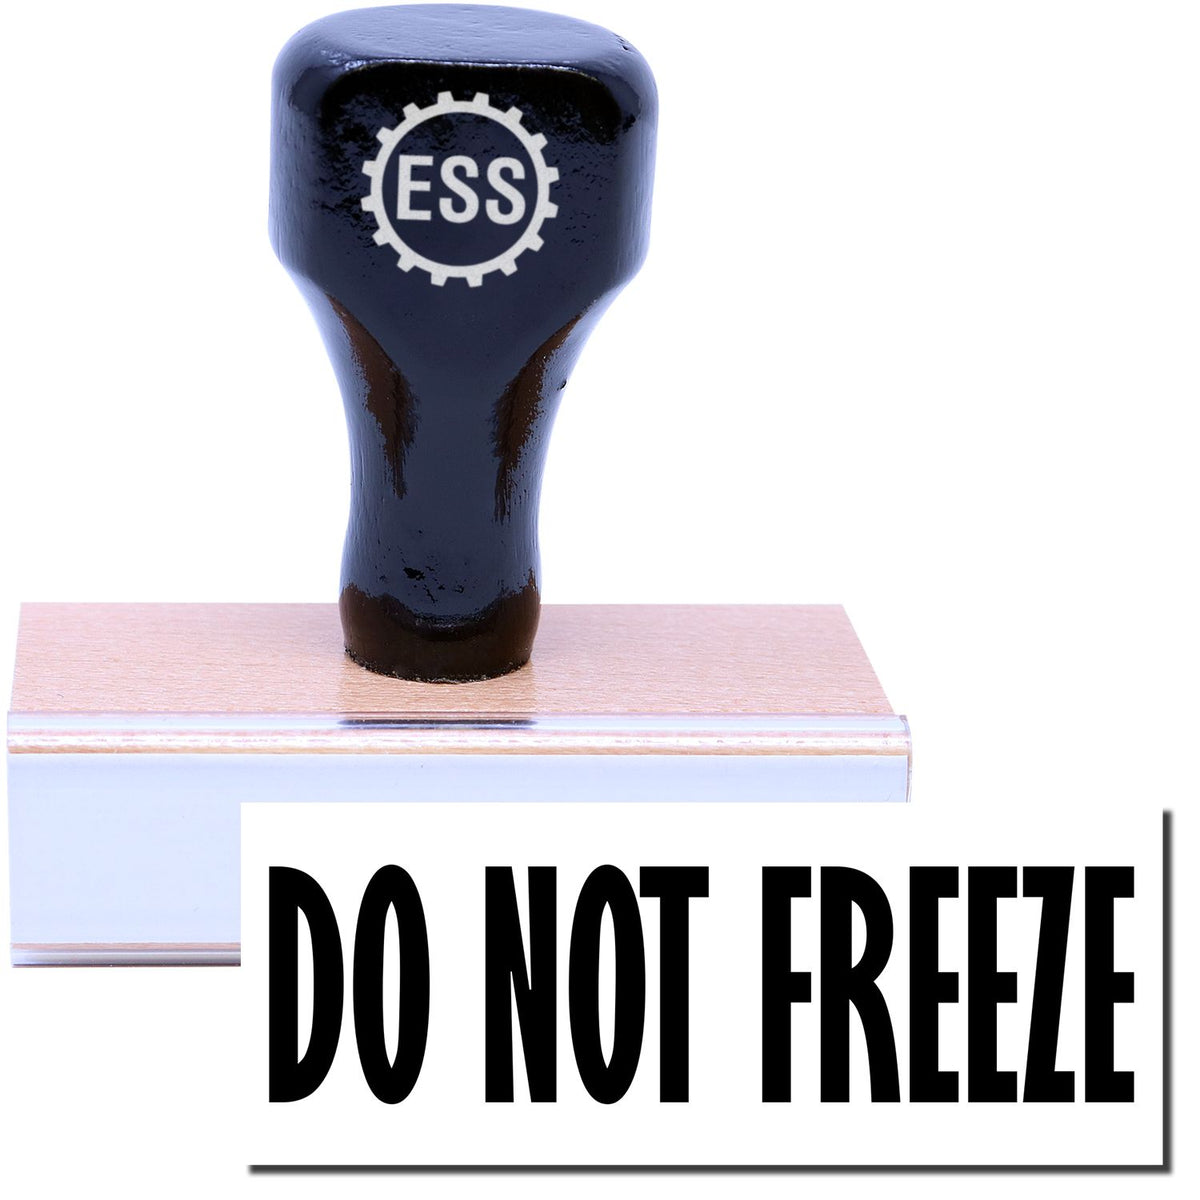 A stock office rubber stamp with a stamped image showing how the text &quot;DO NOT FREEZE&quot; is displayed after stamping.